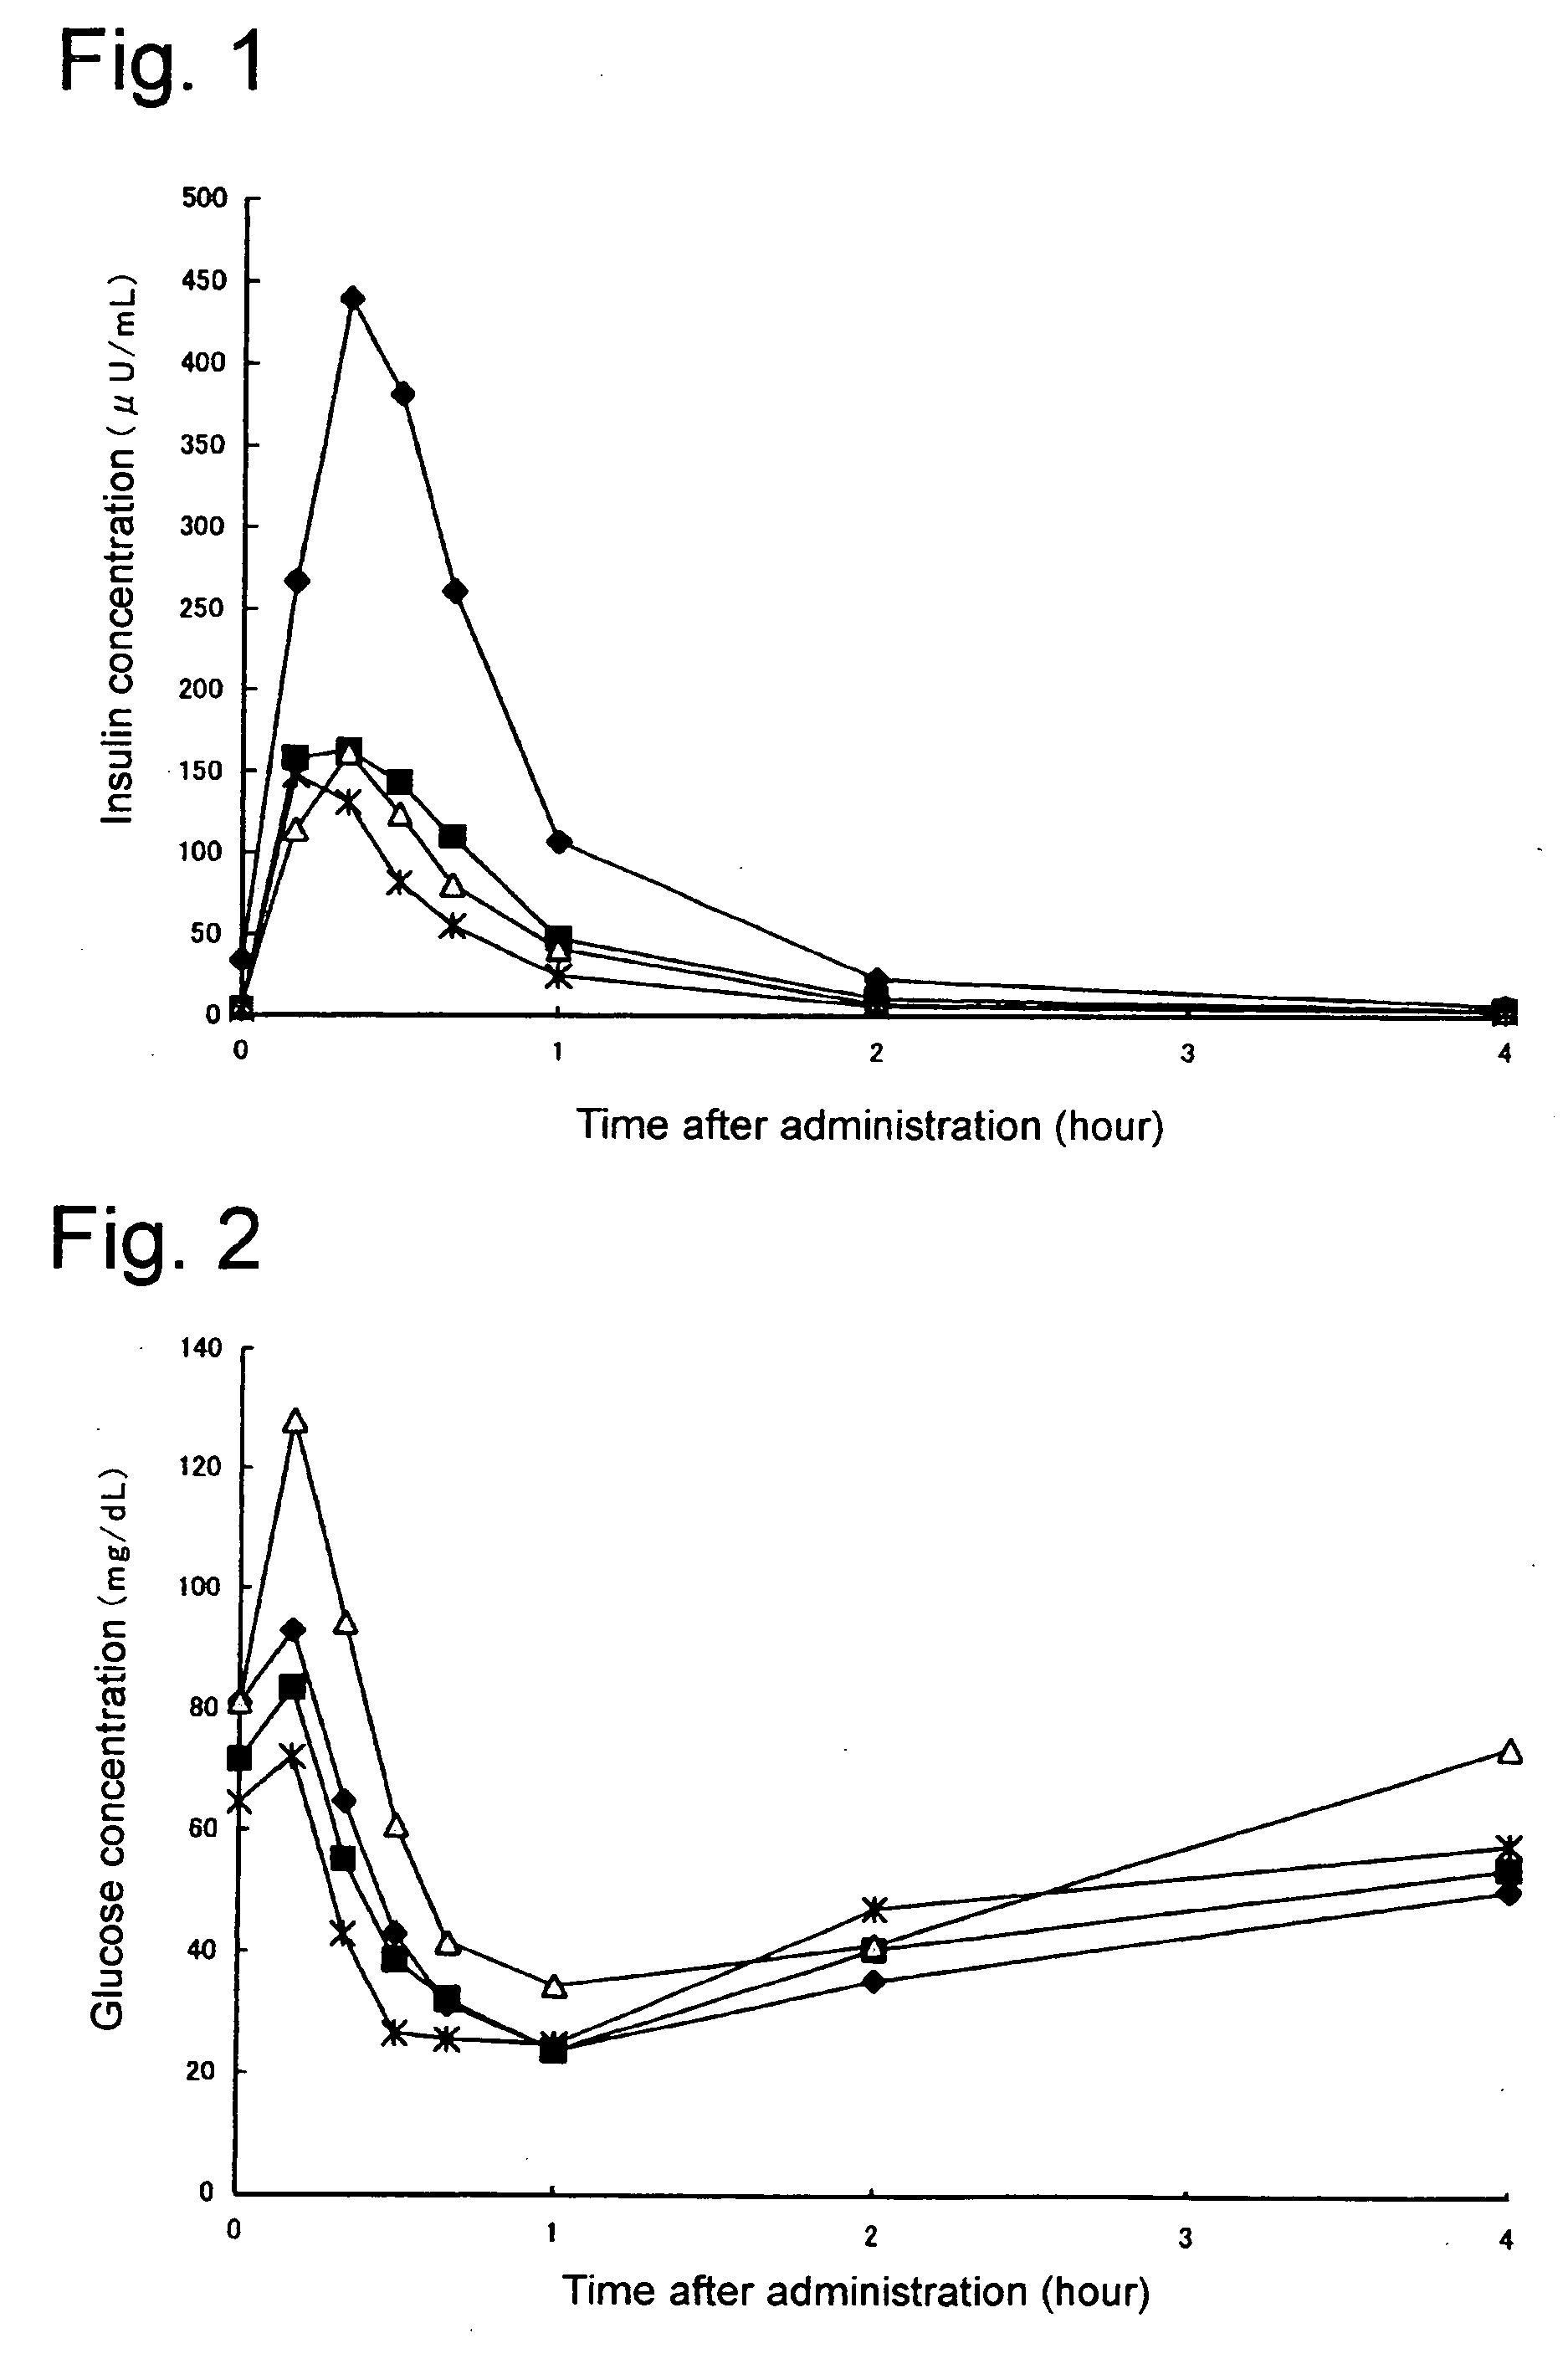 Composition of insulin for nasal administration